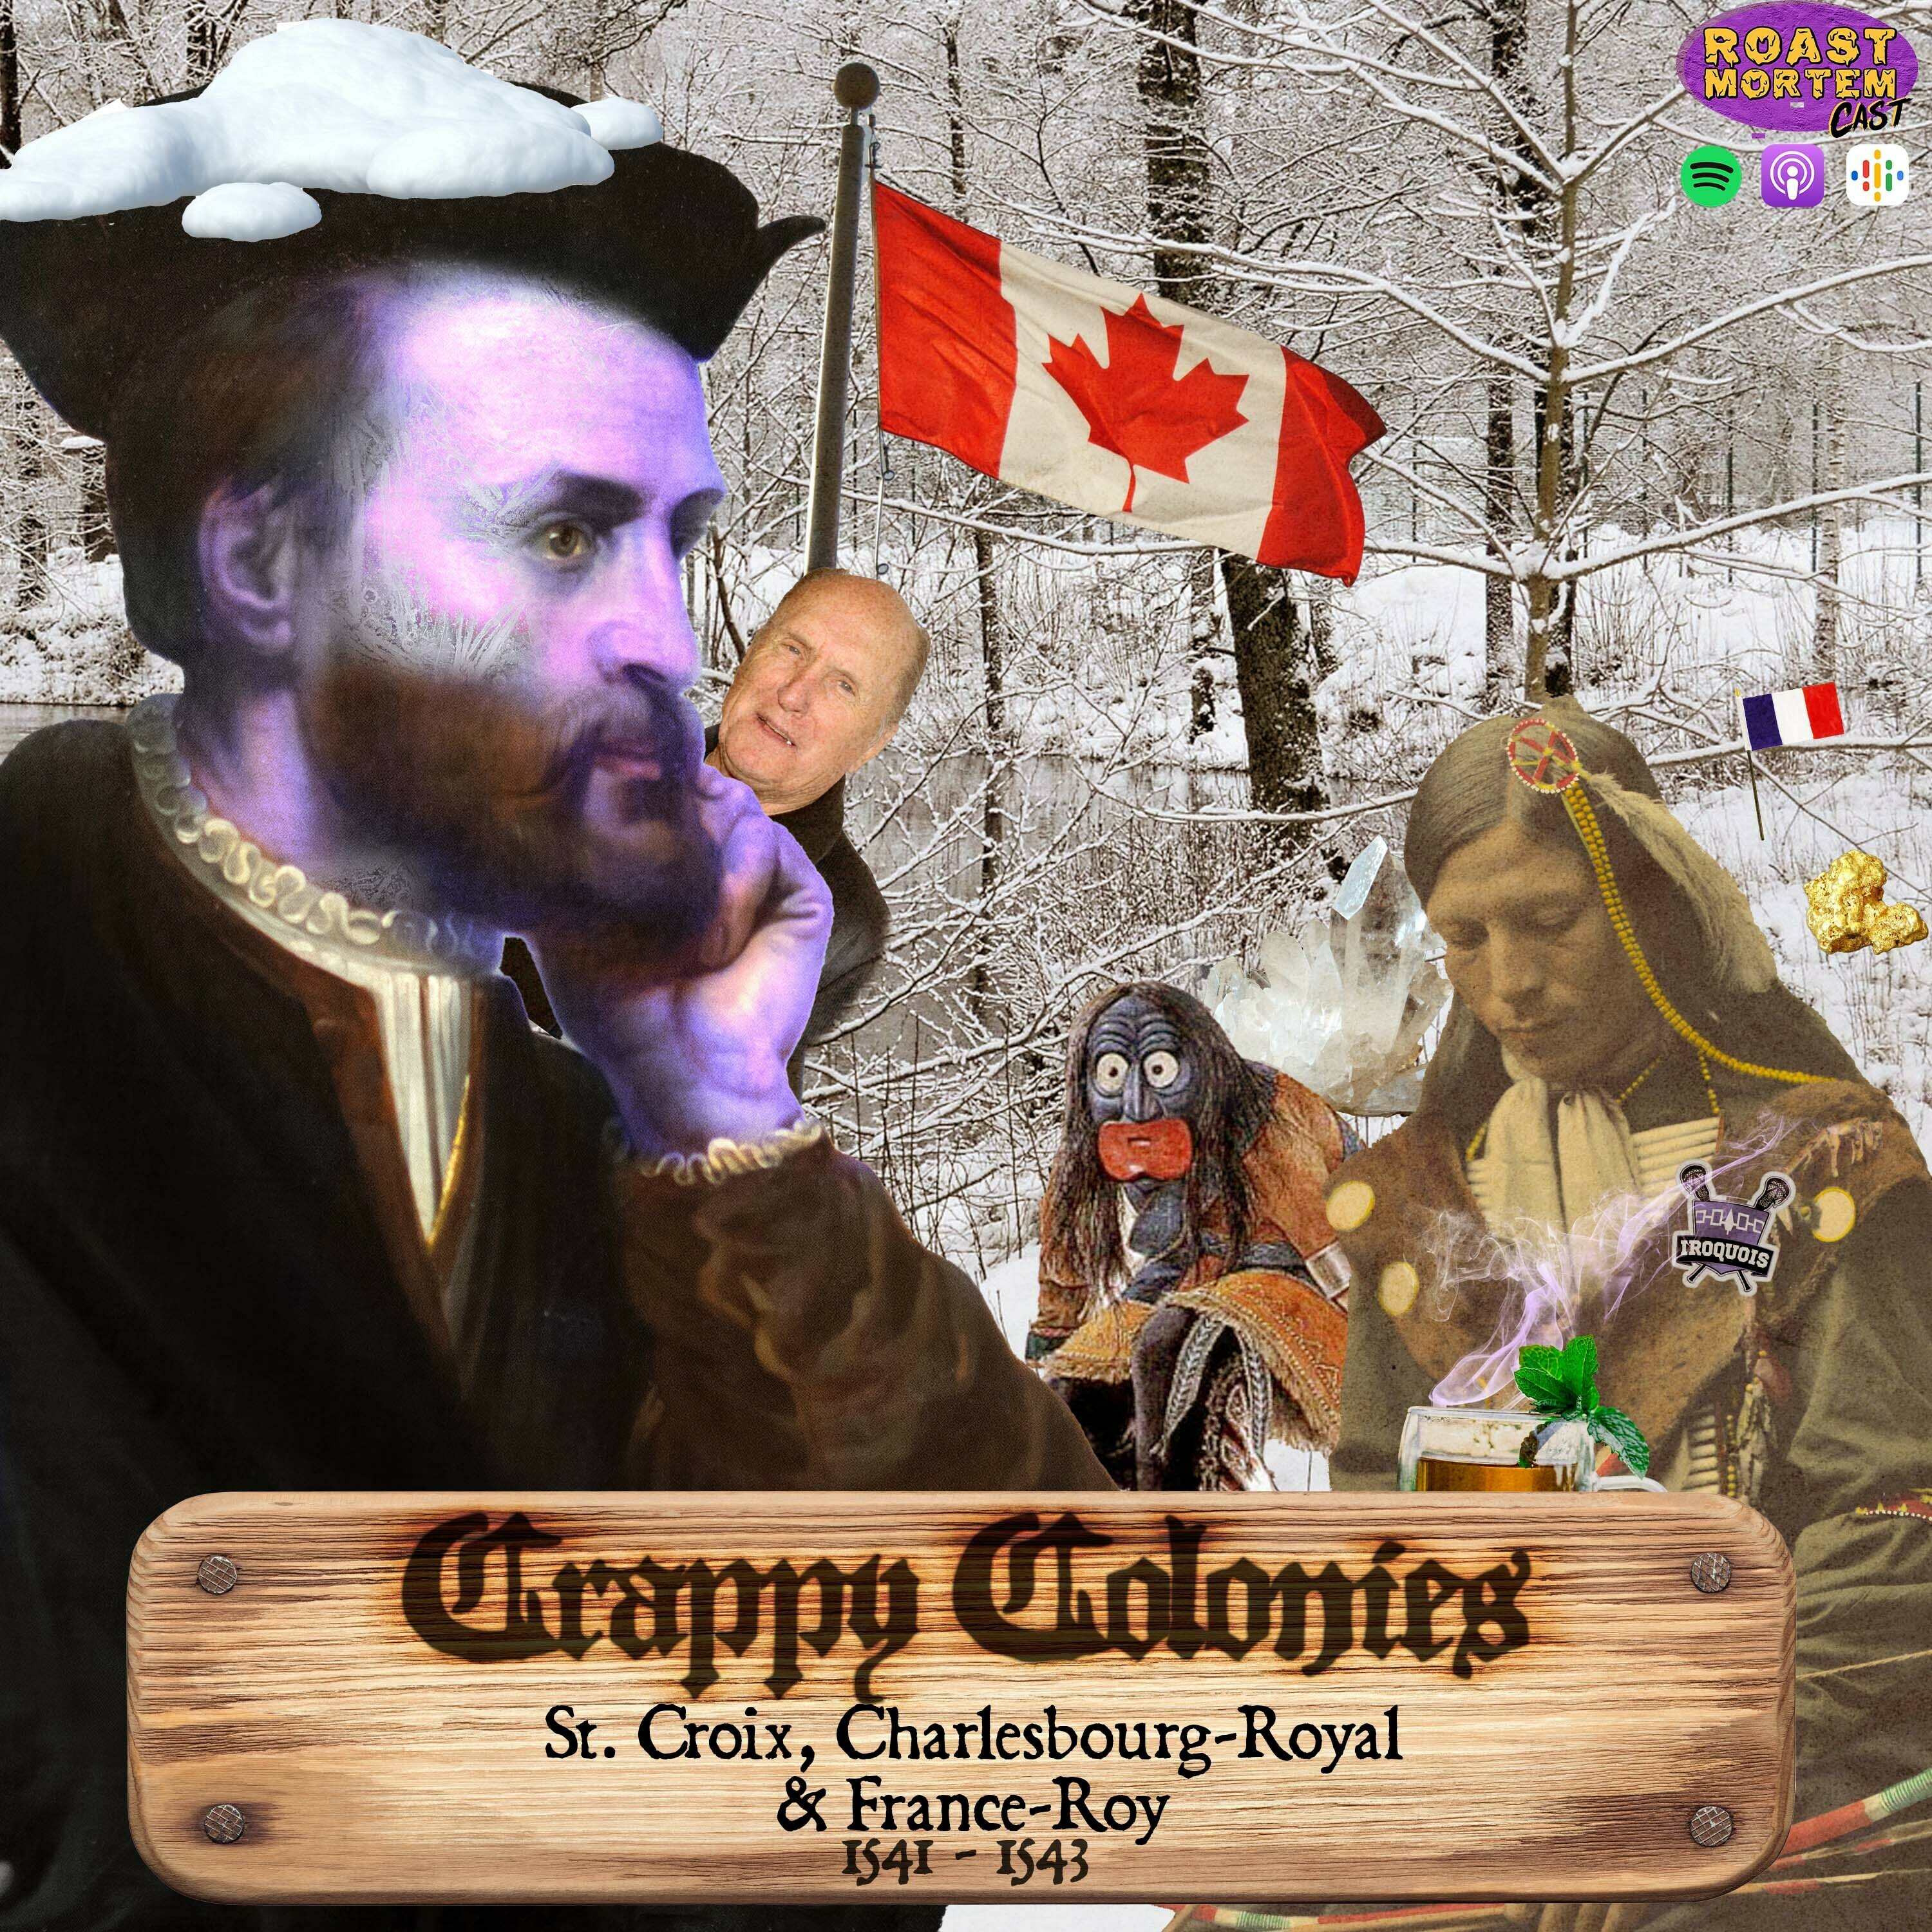 282 - Crappy Colonies: St. Croix, Charlesbourg-Royal & France-Roy